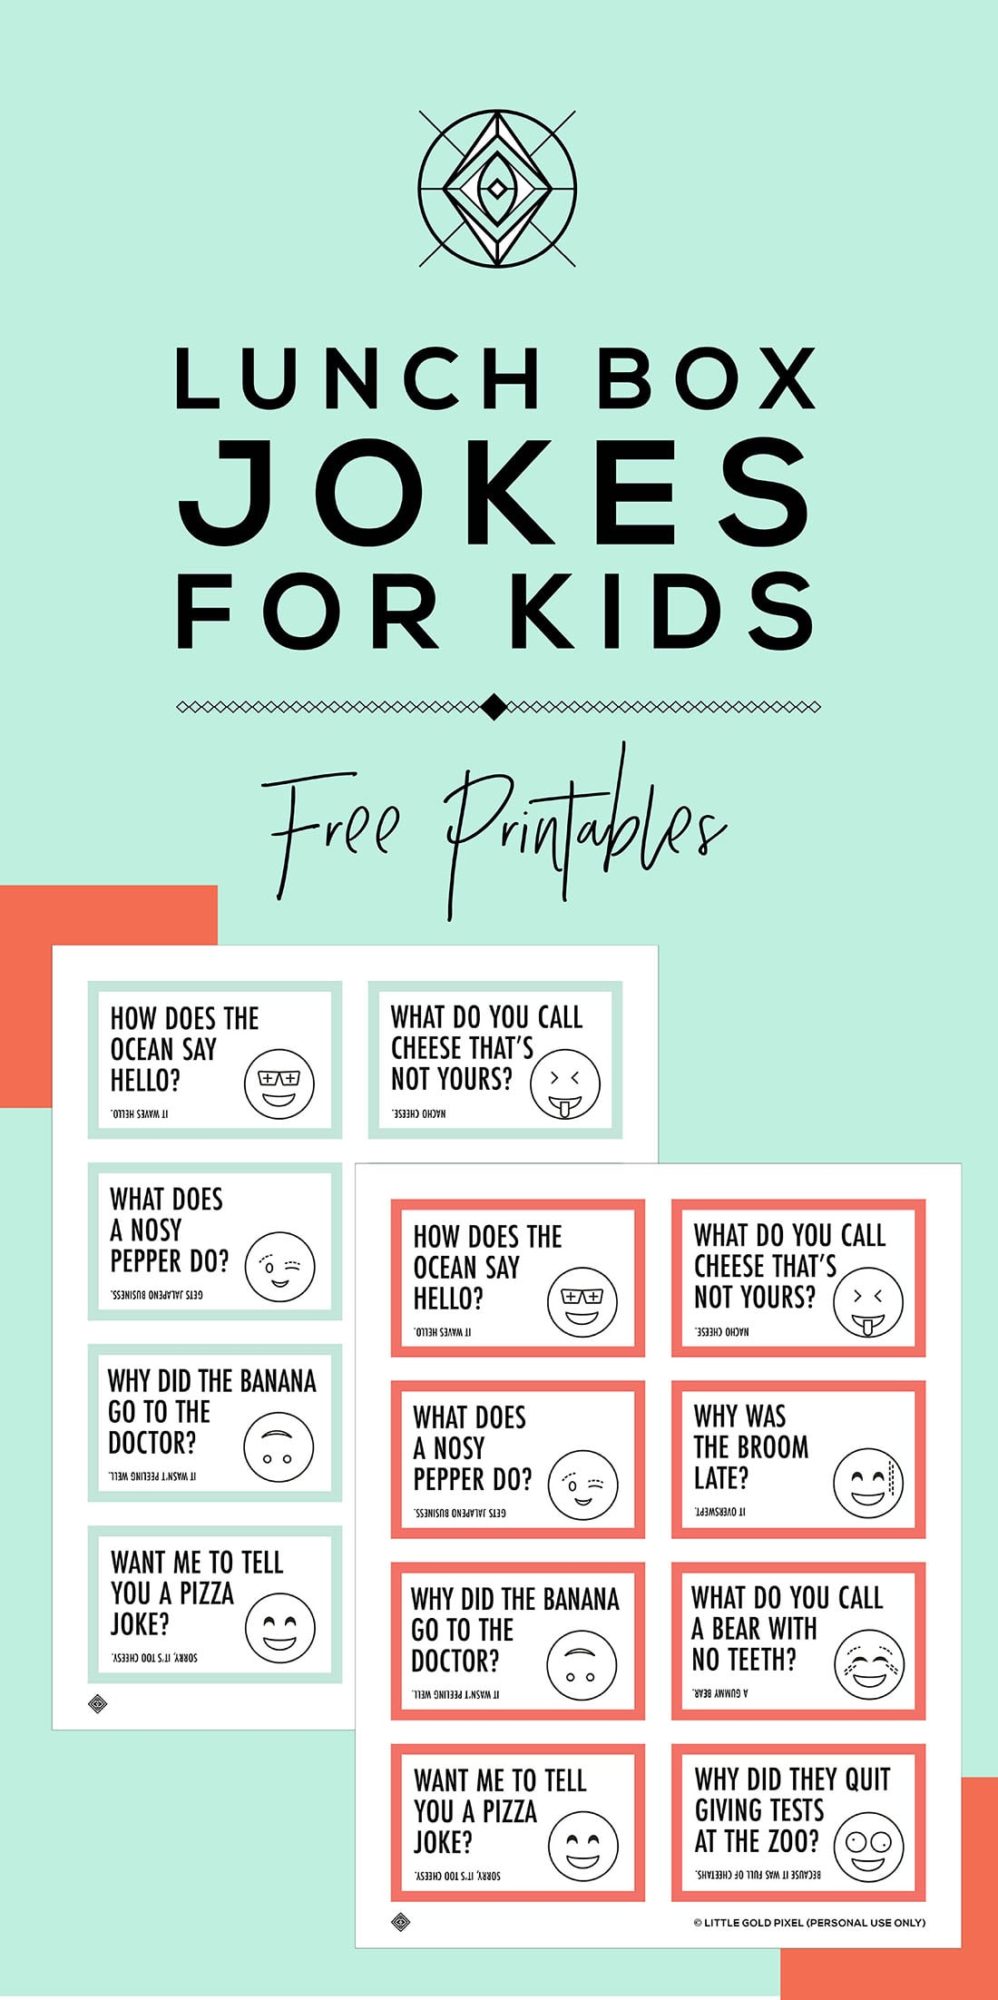 Free Lunch Box Jokes for Kids • Free Printables • Little Gold Pixel • In which I share free lunch box jokes for kids that you can download, print and cut out. Give your kid the gift of a giggle during their school lunchtime.
#freeprintables #freelunchboxjokes #lunchboxnotes #lunchnotes #lunchjokes #kidsjokes